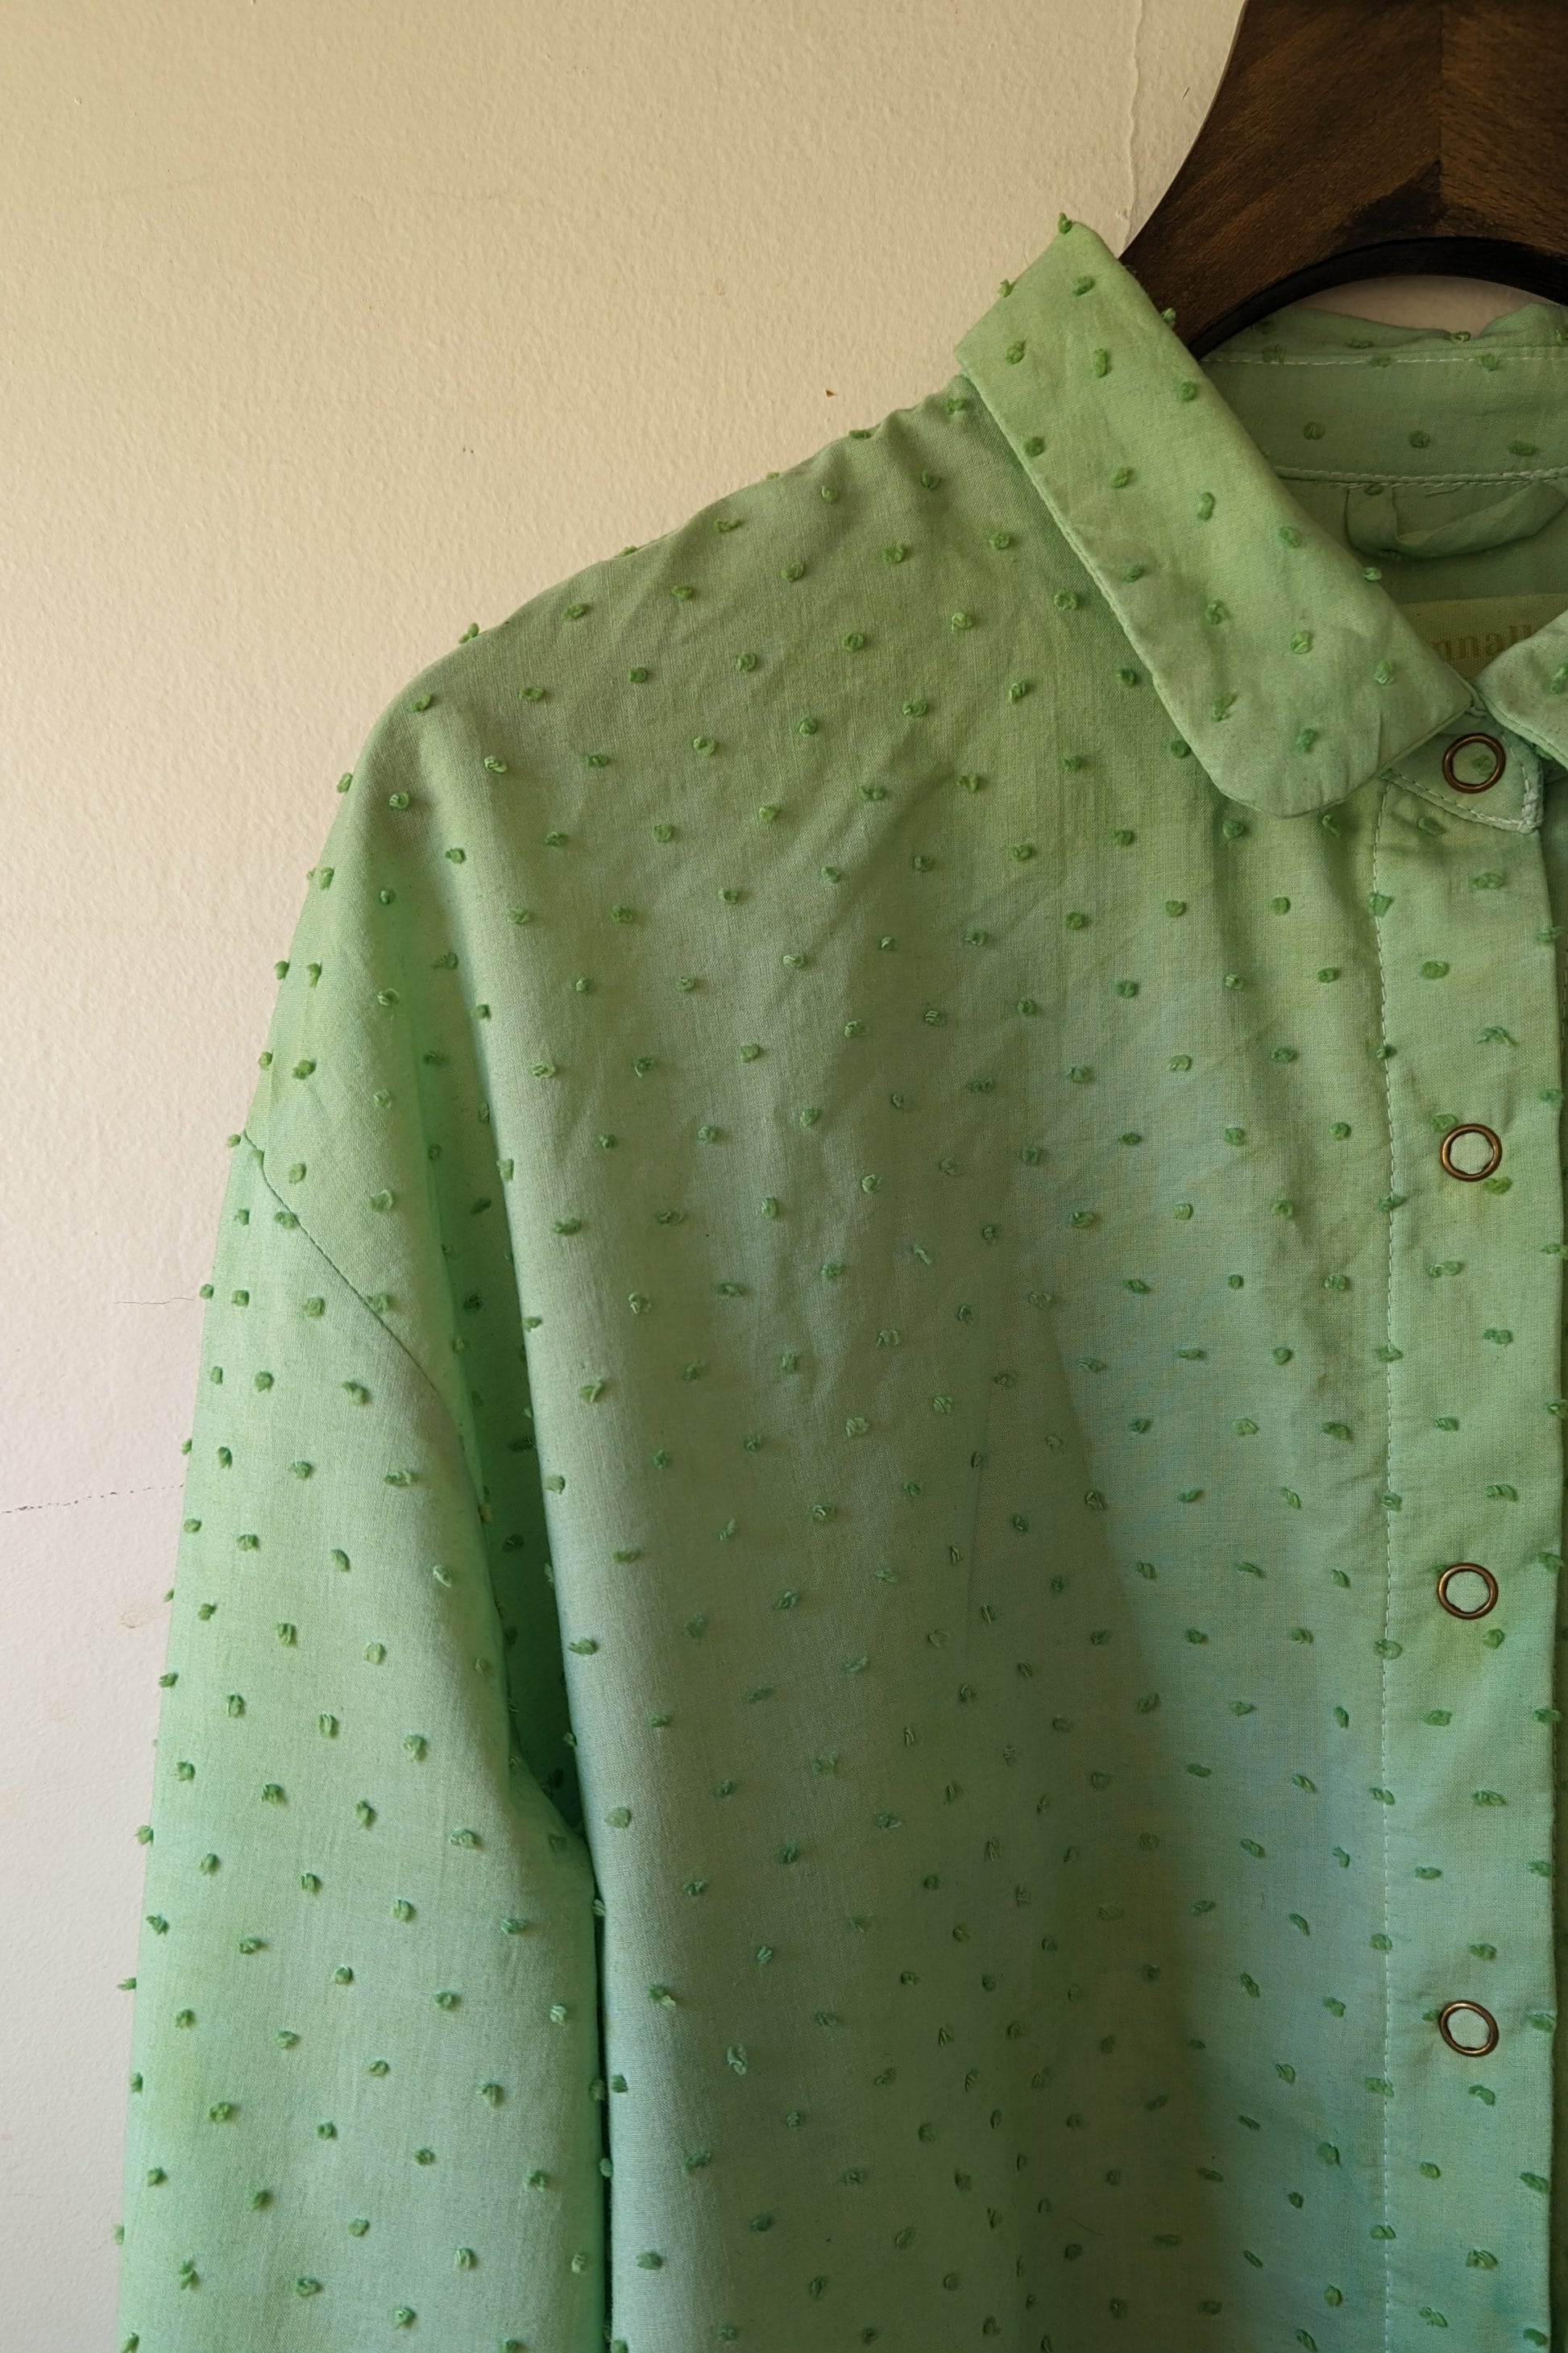 Ginsburg Shirt Hand Dyed in Juniper Green by Connally Goods